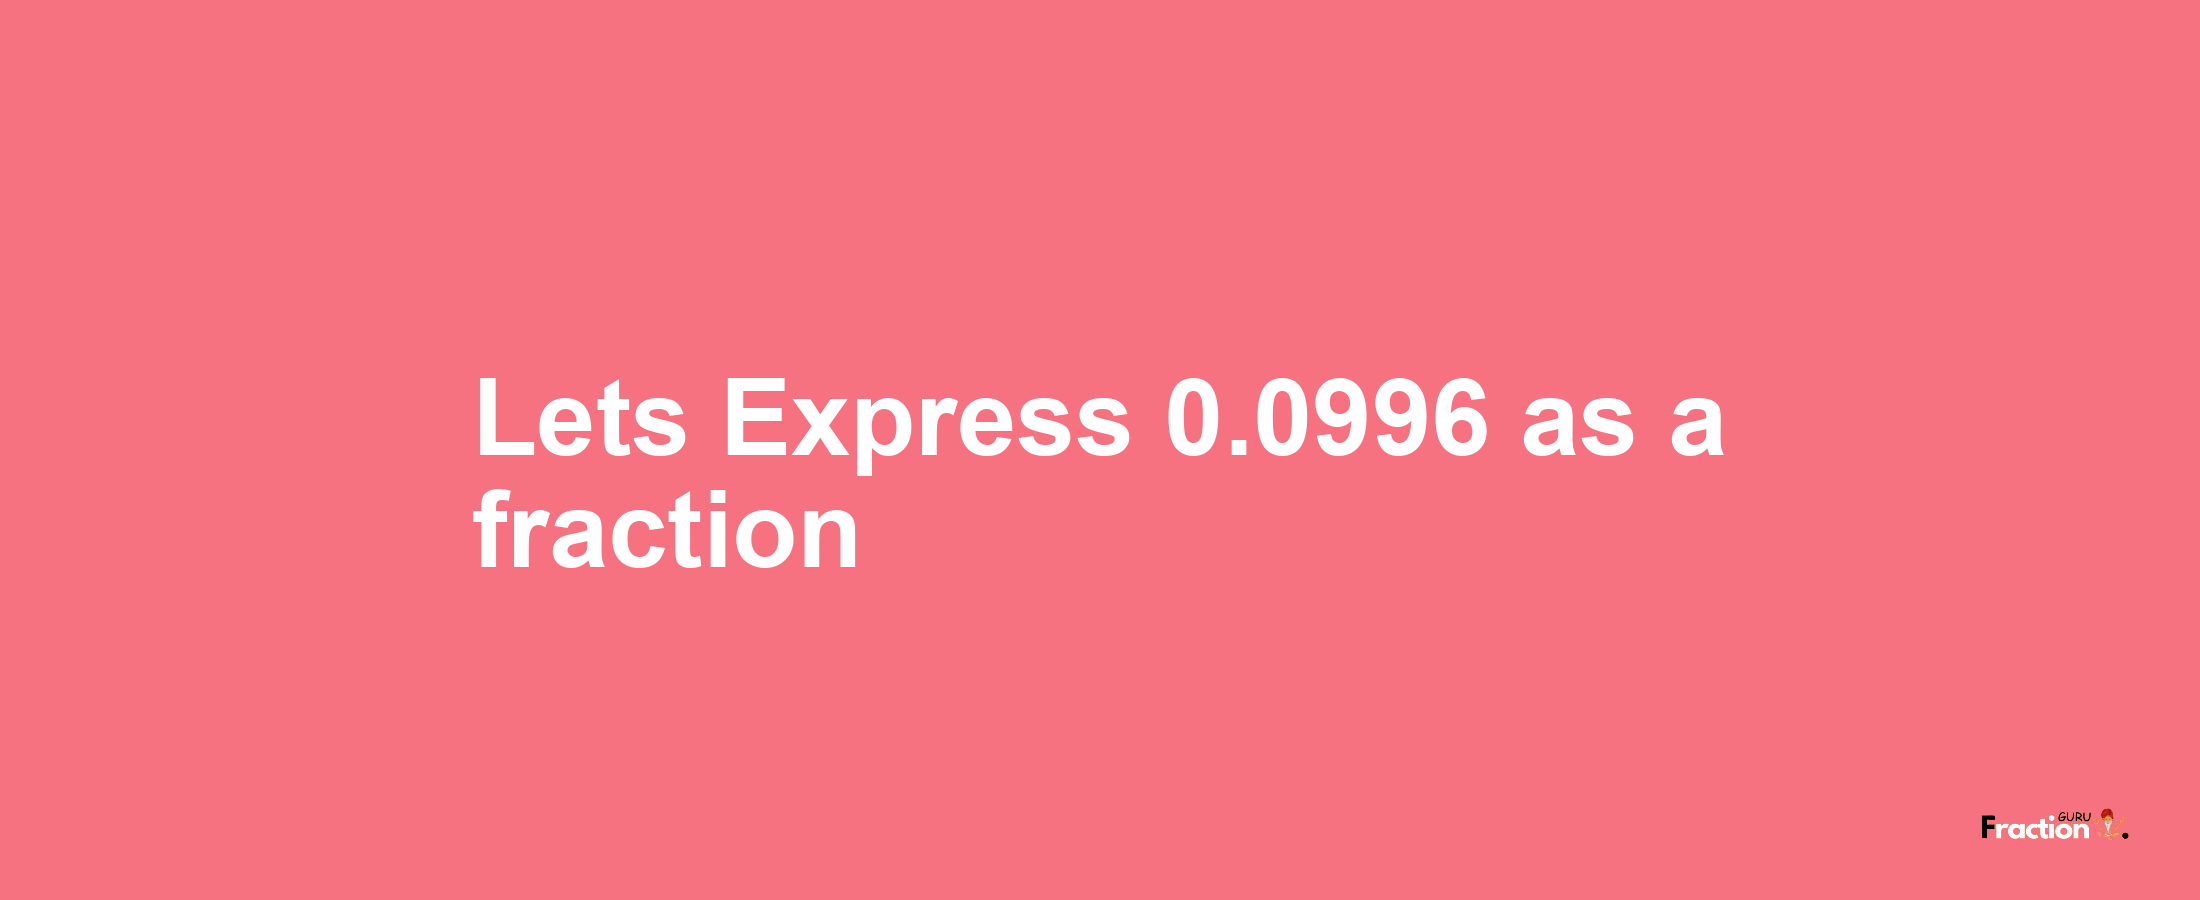 Lets Express 0.0996 as afraction